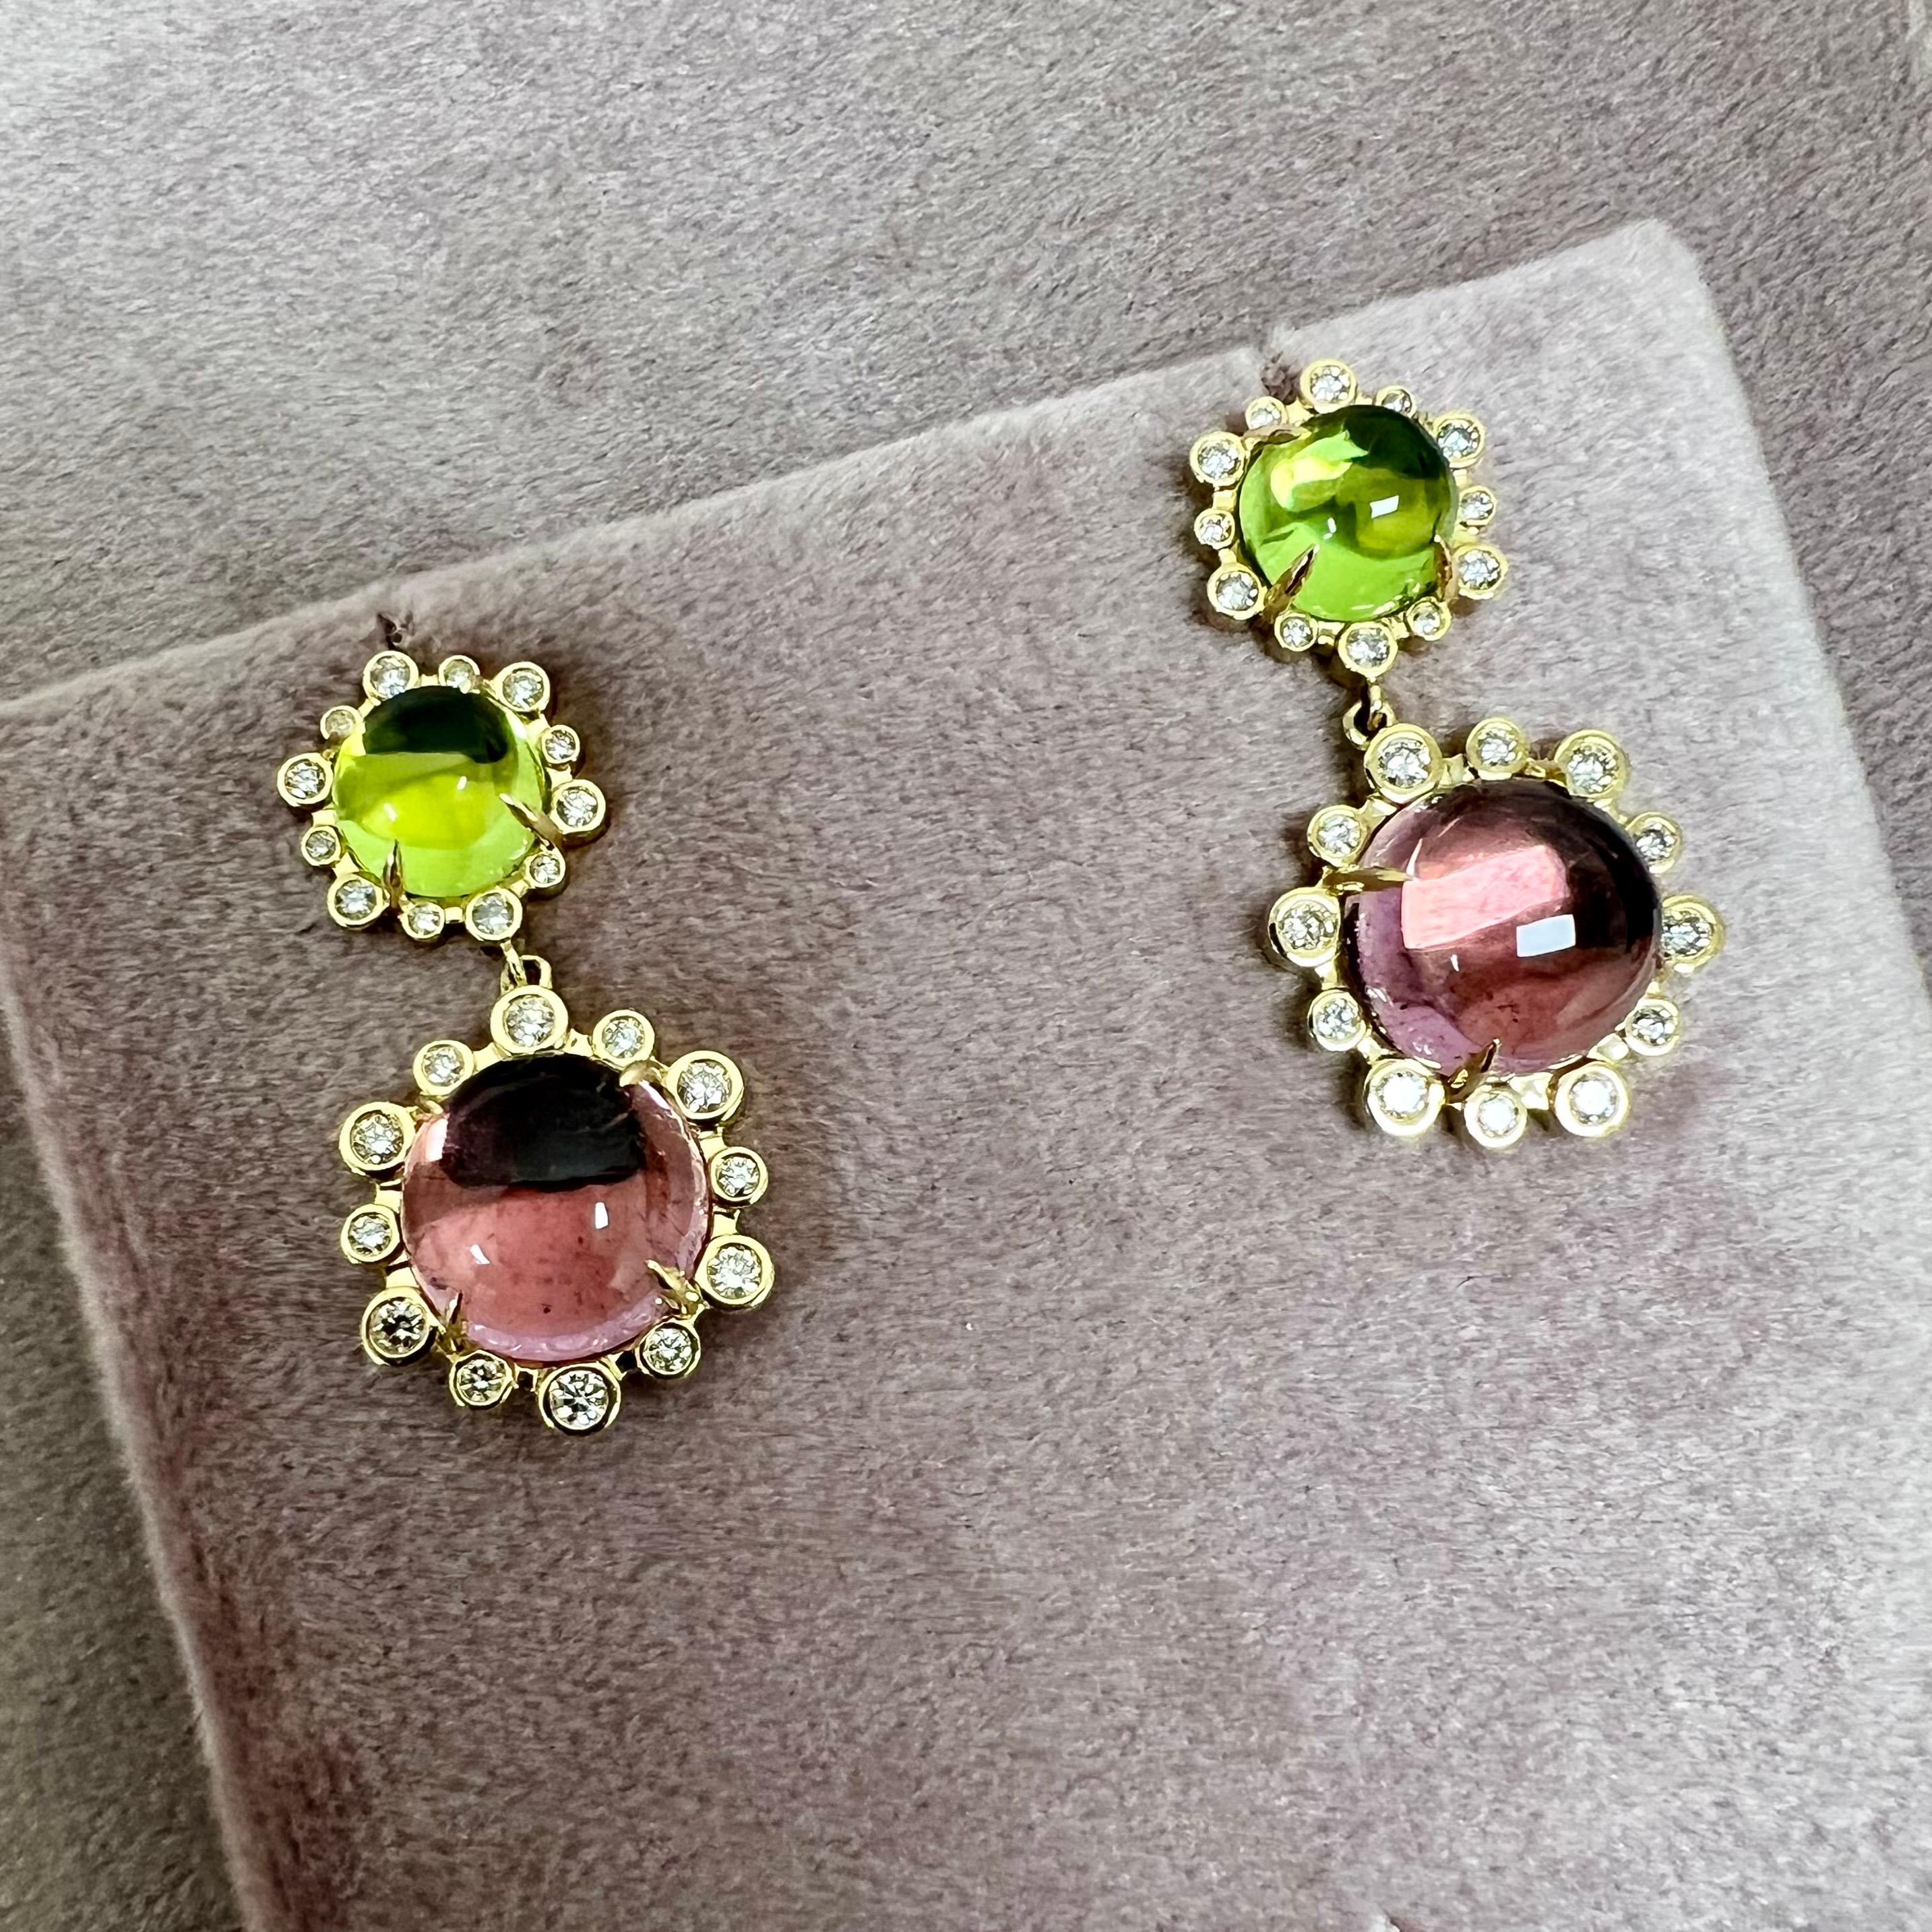 Created in 18 karat yellow gold
Peridot 5.40 carats approx.
Rubellite 12 carats approx.
Diamonds 0.80 carat approx.
18 kyg butterfly backs
Limited Edition


Dreamt up in 18 karat yellow gold, this limited edition earring set sparkles with 5.40